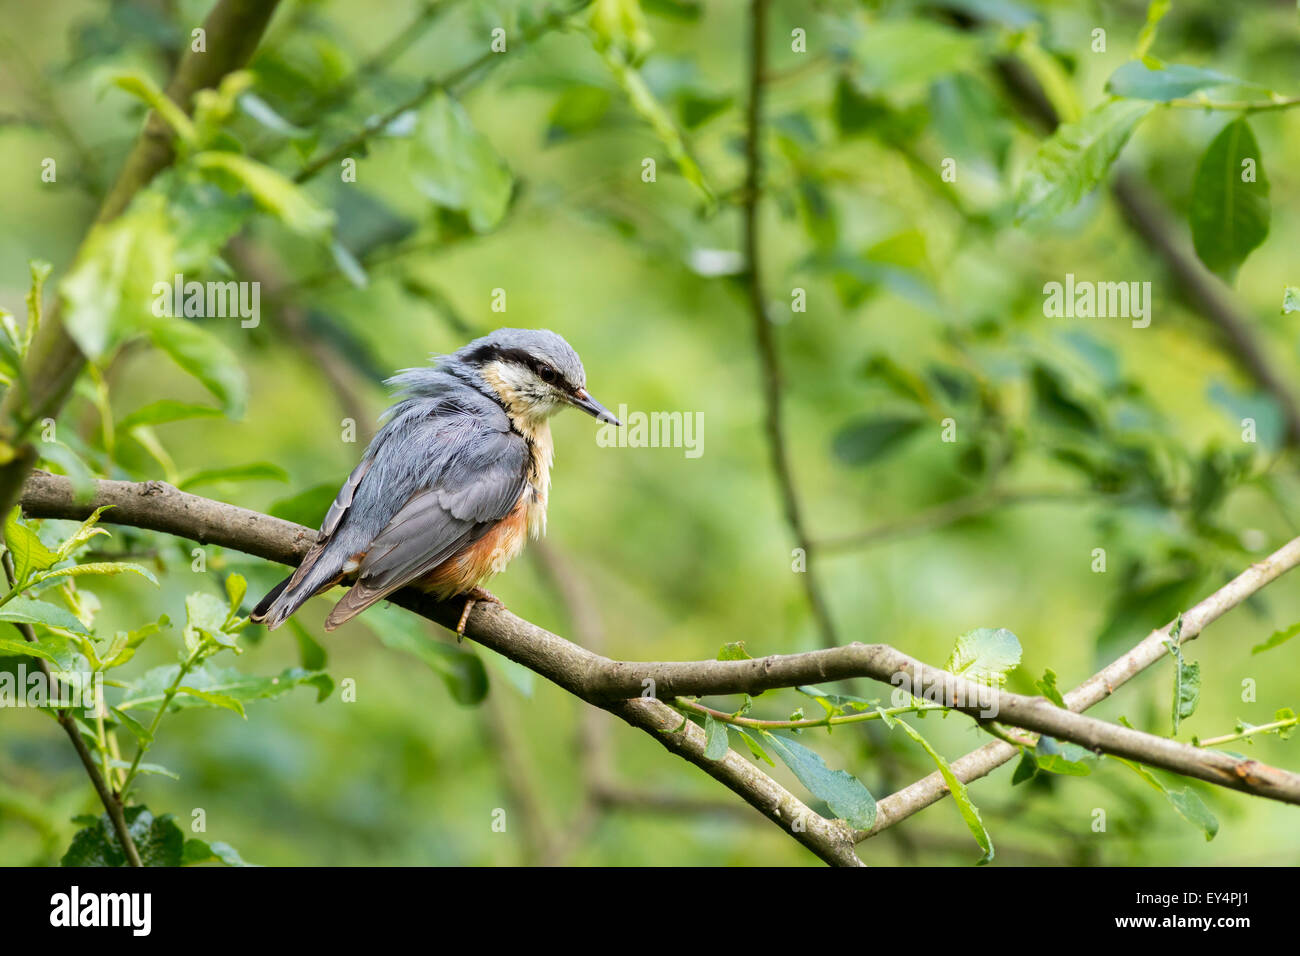 Nuthatch (Sitta europaea) perched on a branch Stock Photo